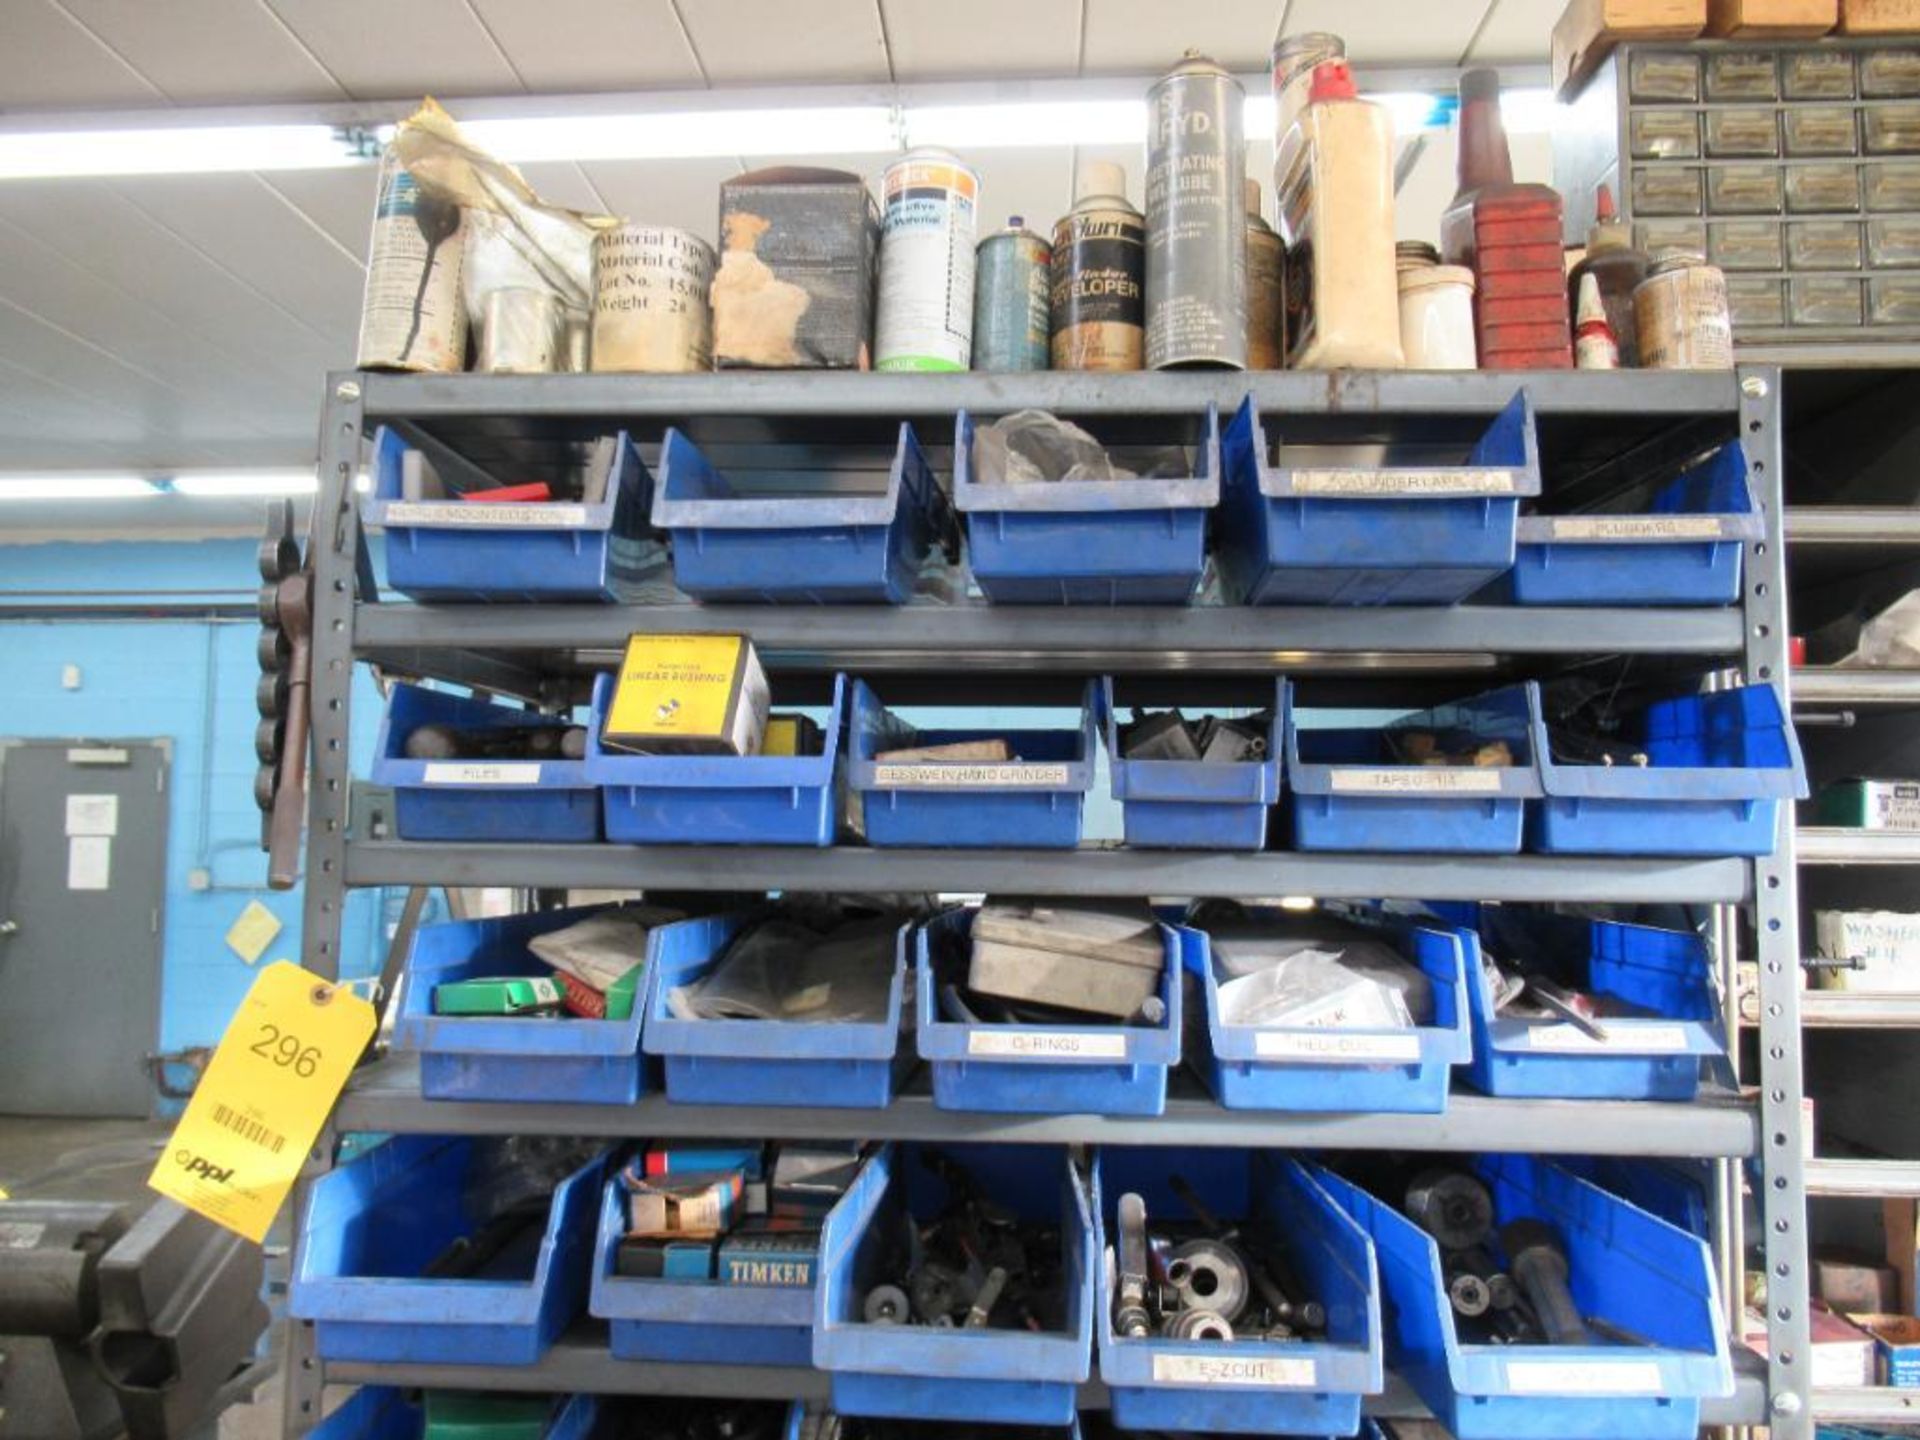 LOT: Shelving Unit w/Contents of Bearings, Machine Parts, Hand Tools, Stamp Kits, etc. - Image 4 of 4